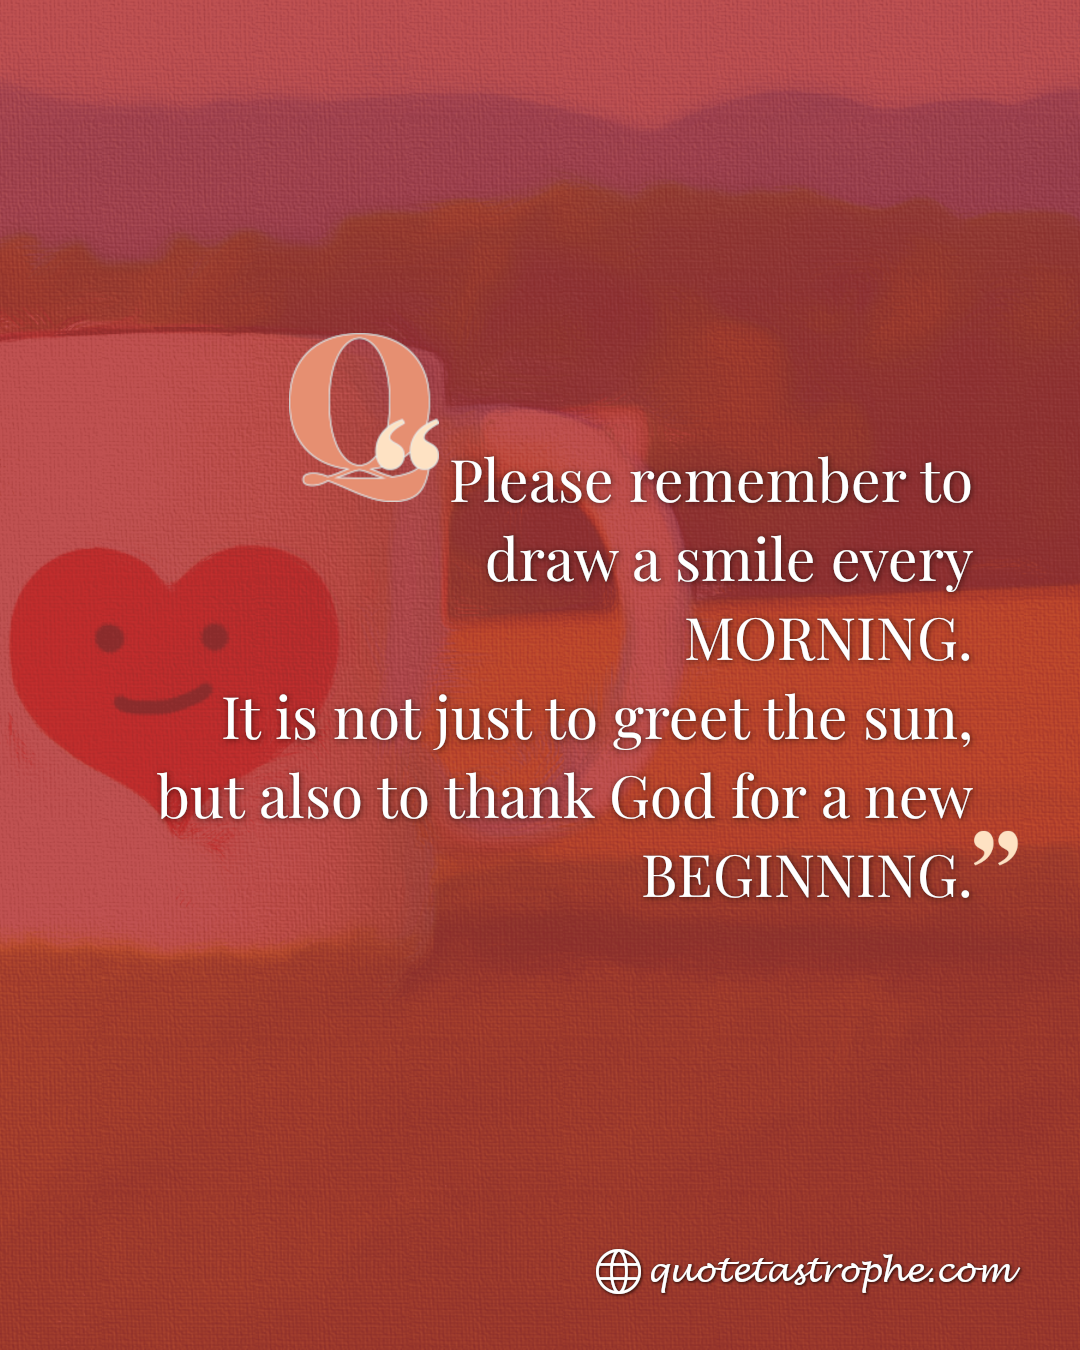 Remember to Draw a Smile Every Morning to Thank God